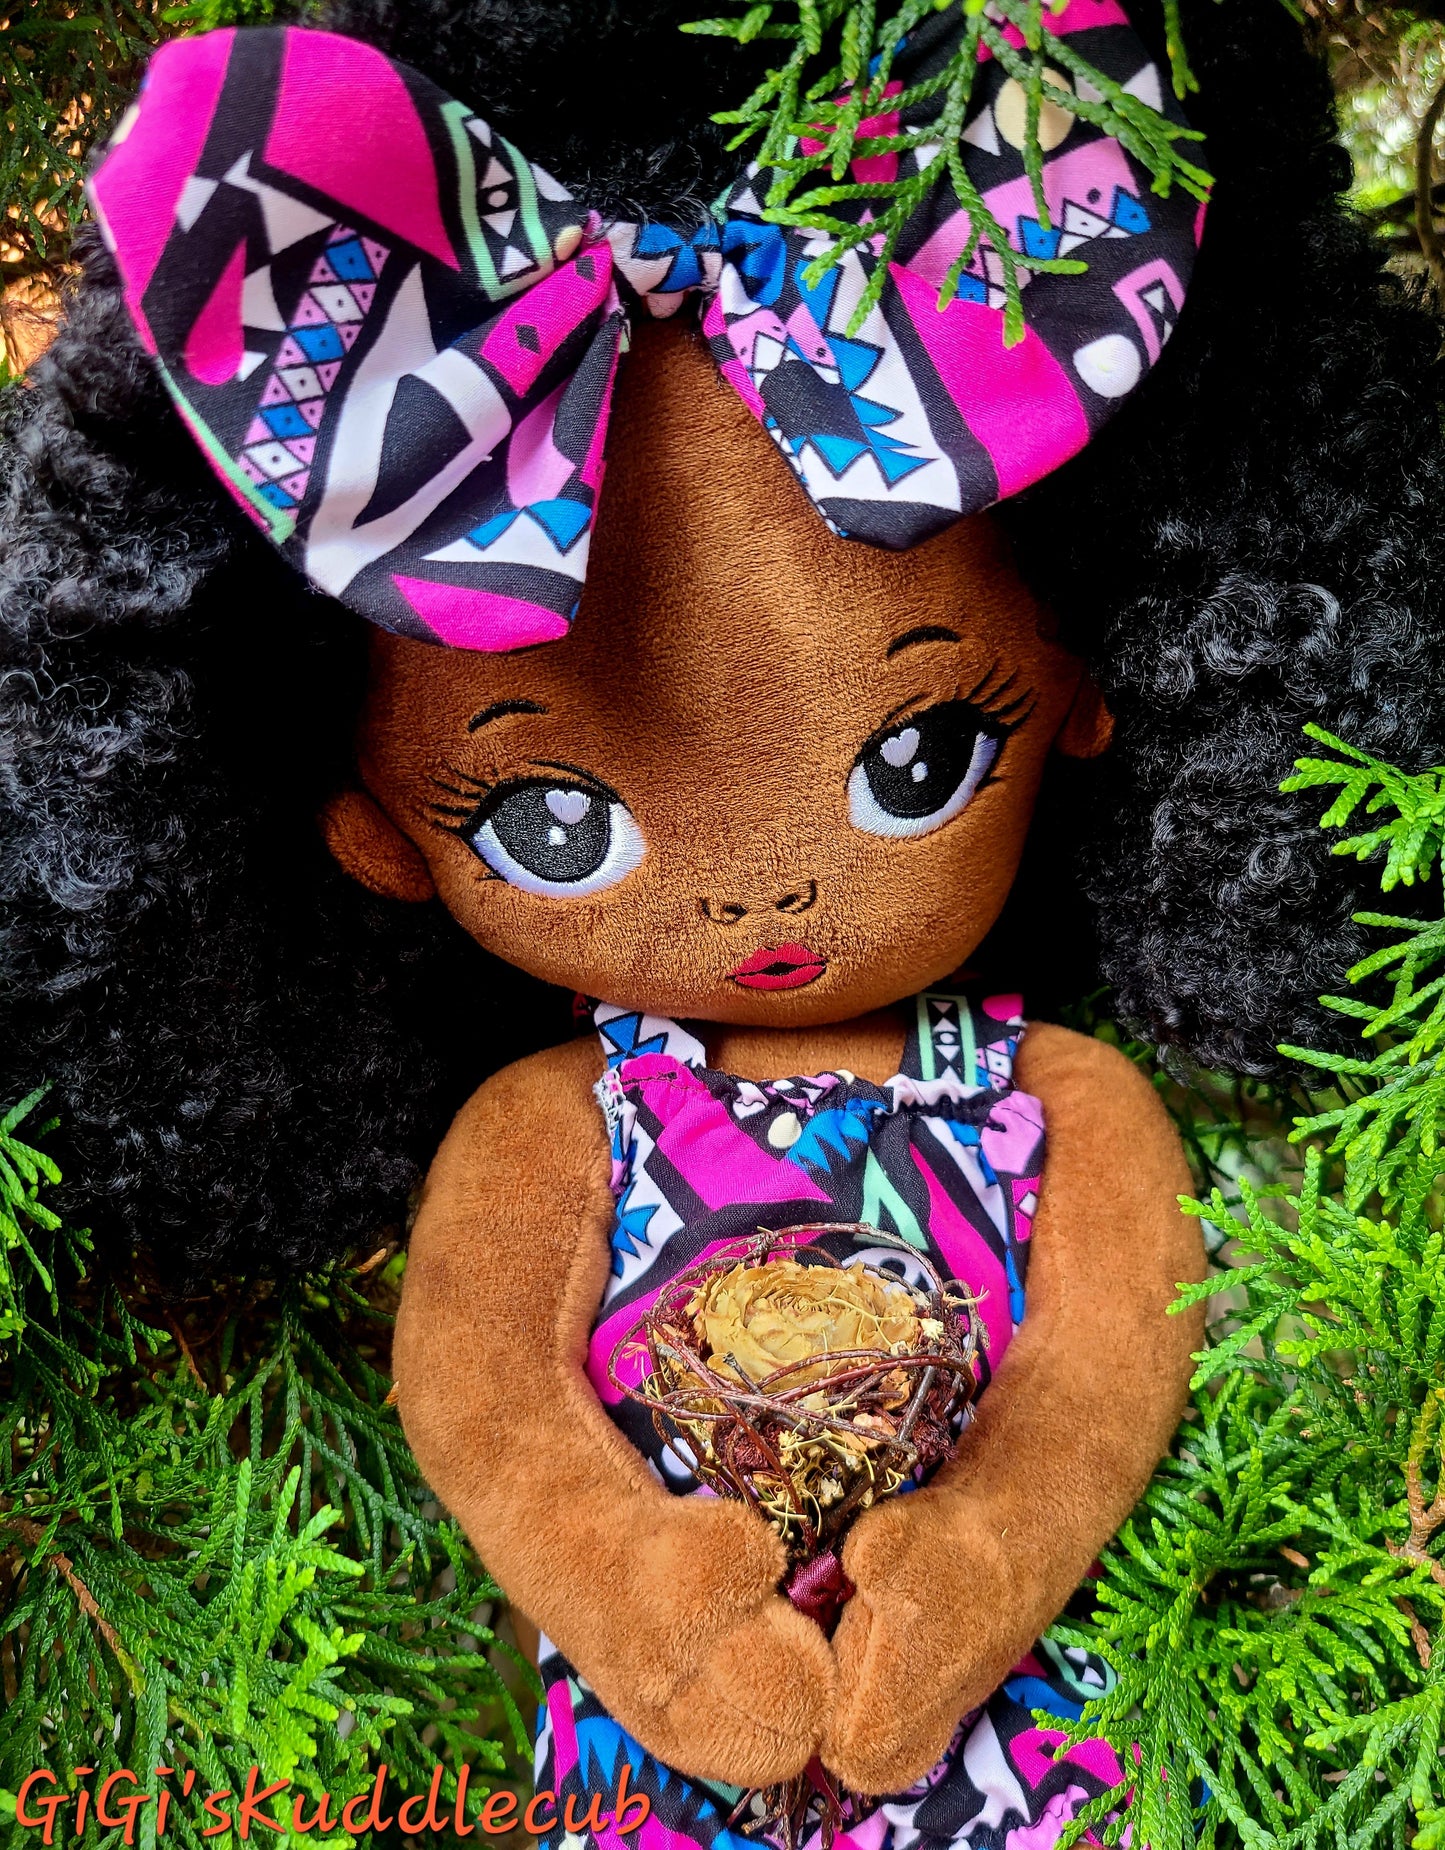 Personalized Soft Rag 19"Brown Skin Baby Girl Plush Rag Doll Toy/Decor/ Handmade Baby Gift/ Personalized Gift